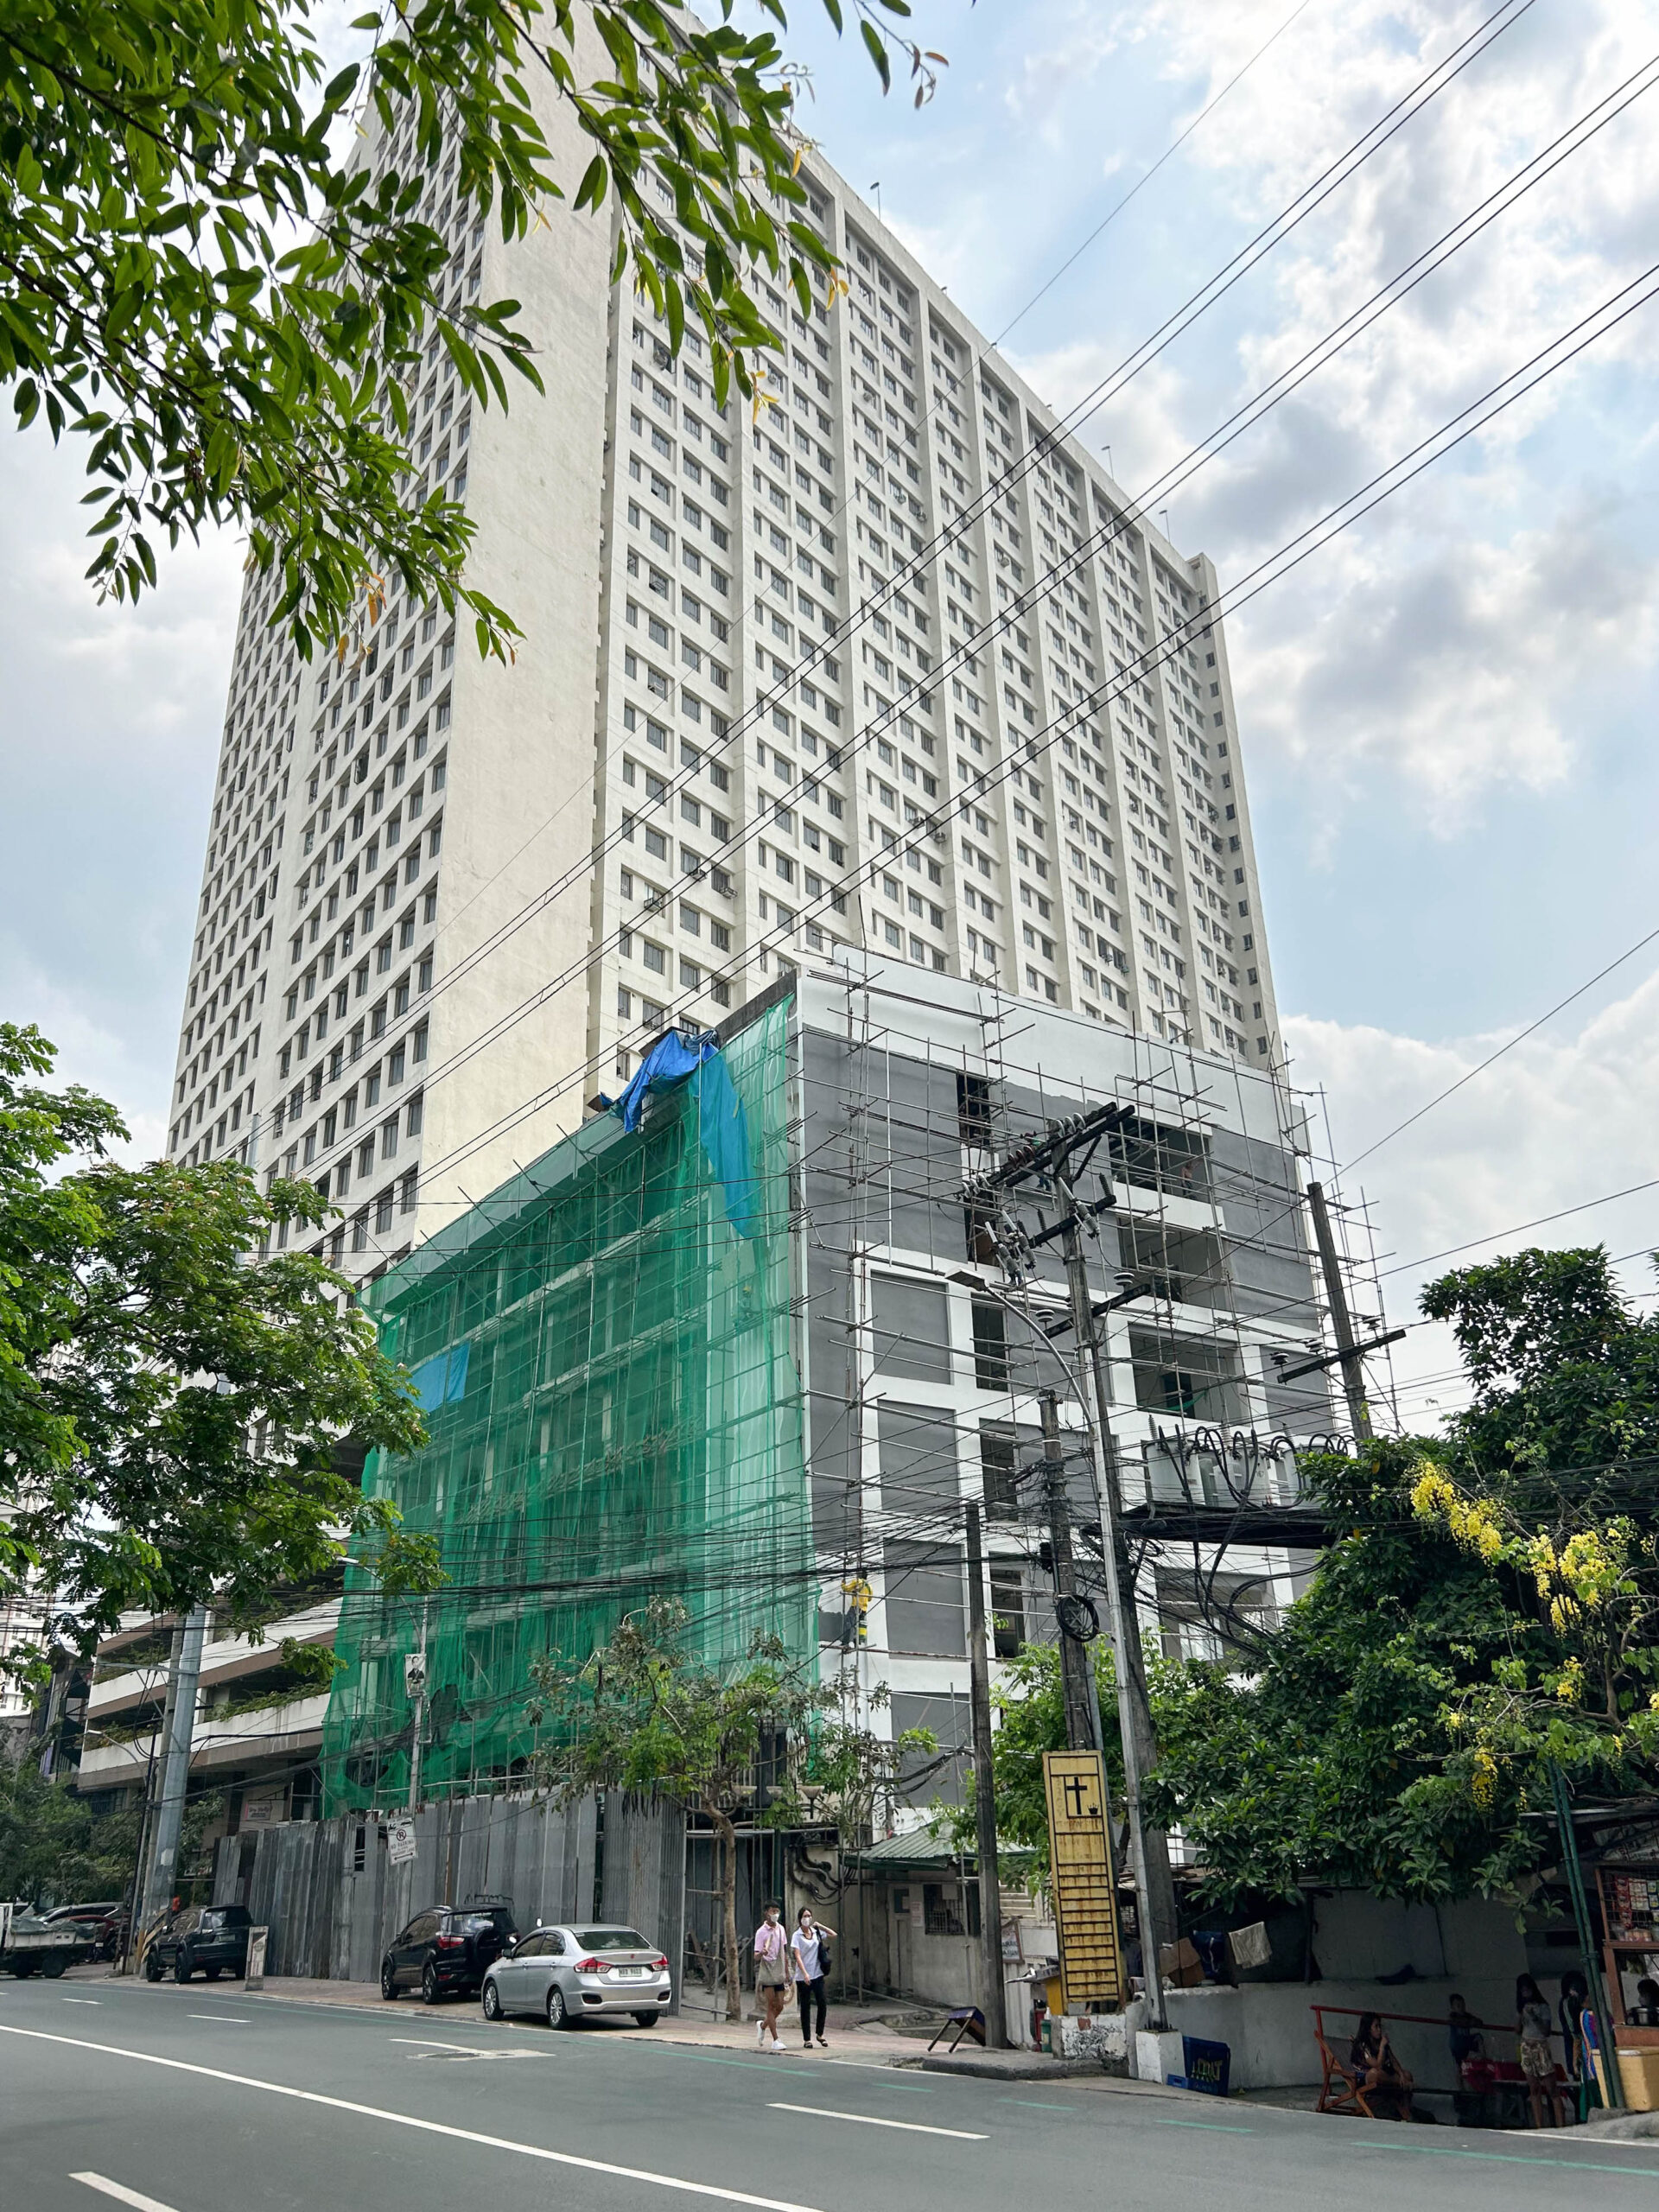 8-Storey Commercial Building For Sale along Tomas Morato